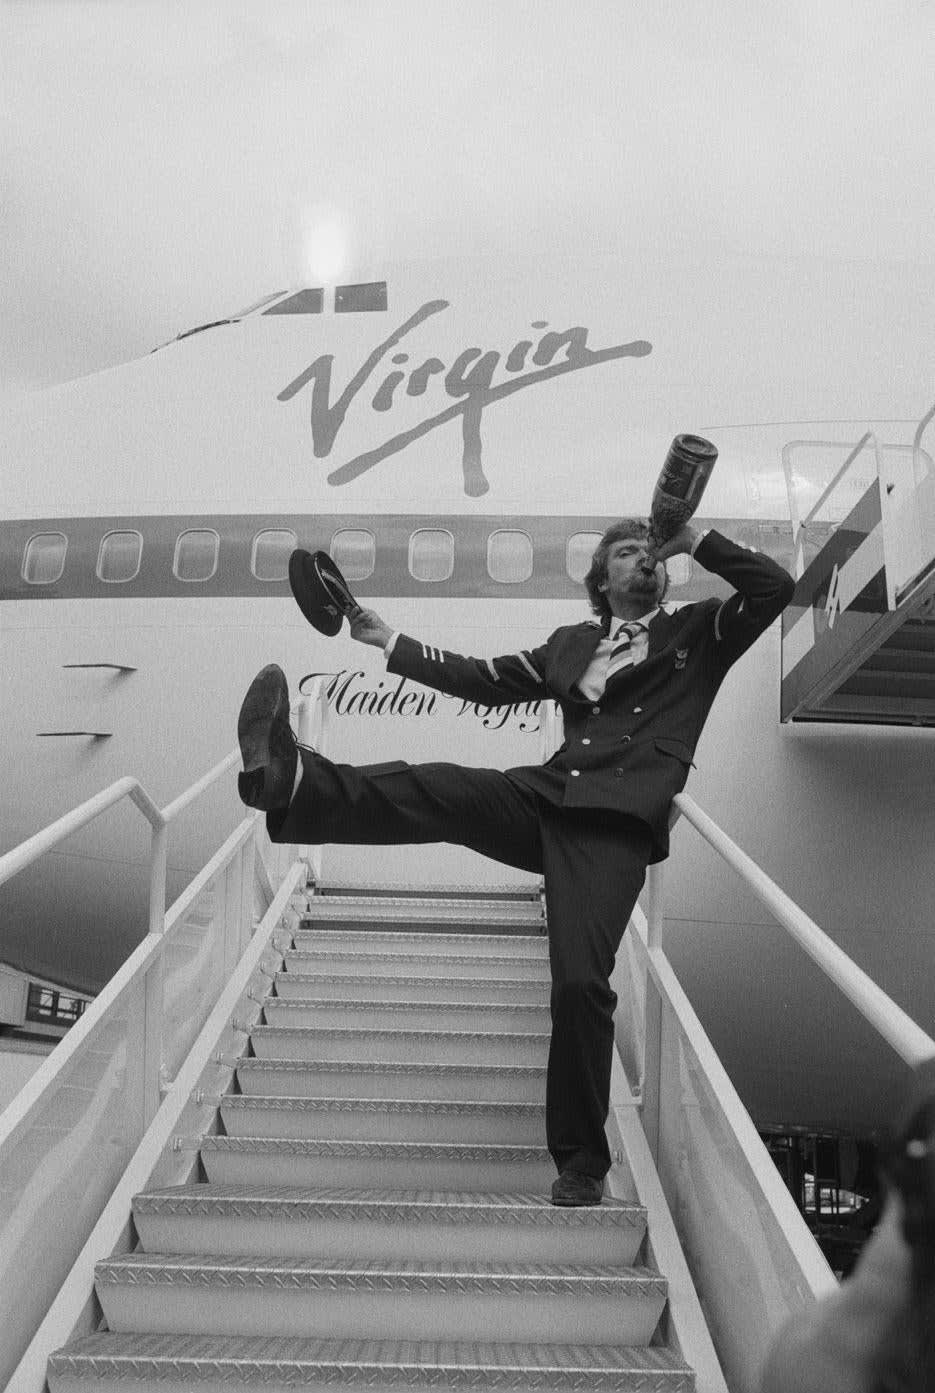 English business magnate Richard Branson inaugurates his new airline Virgin Atlantic, with a swig of champagne on the steps of the airline's 747 - 1984